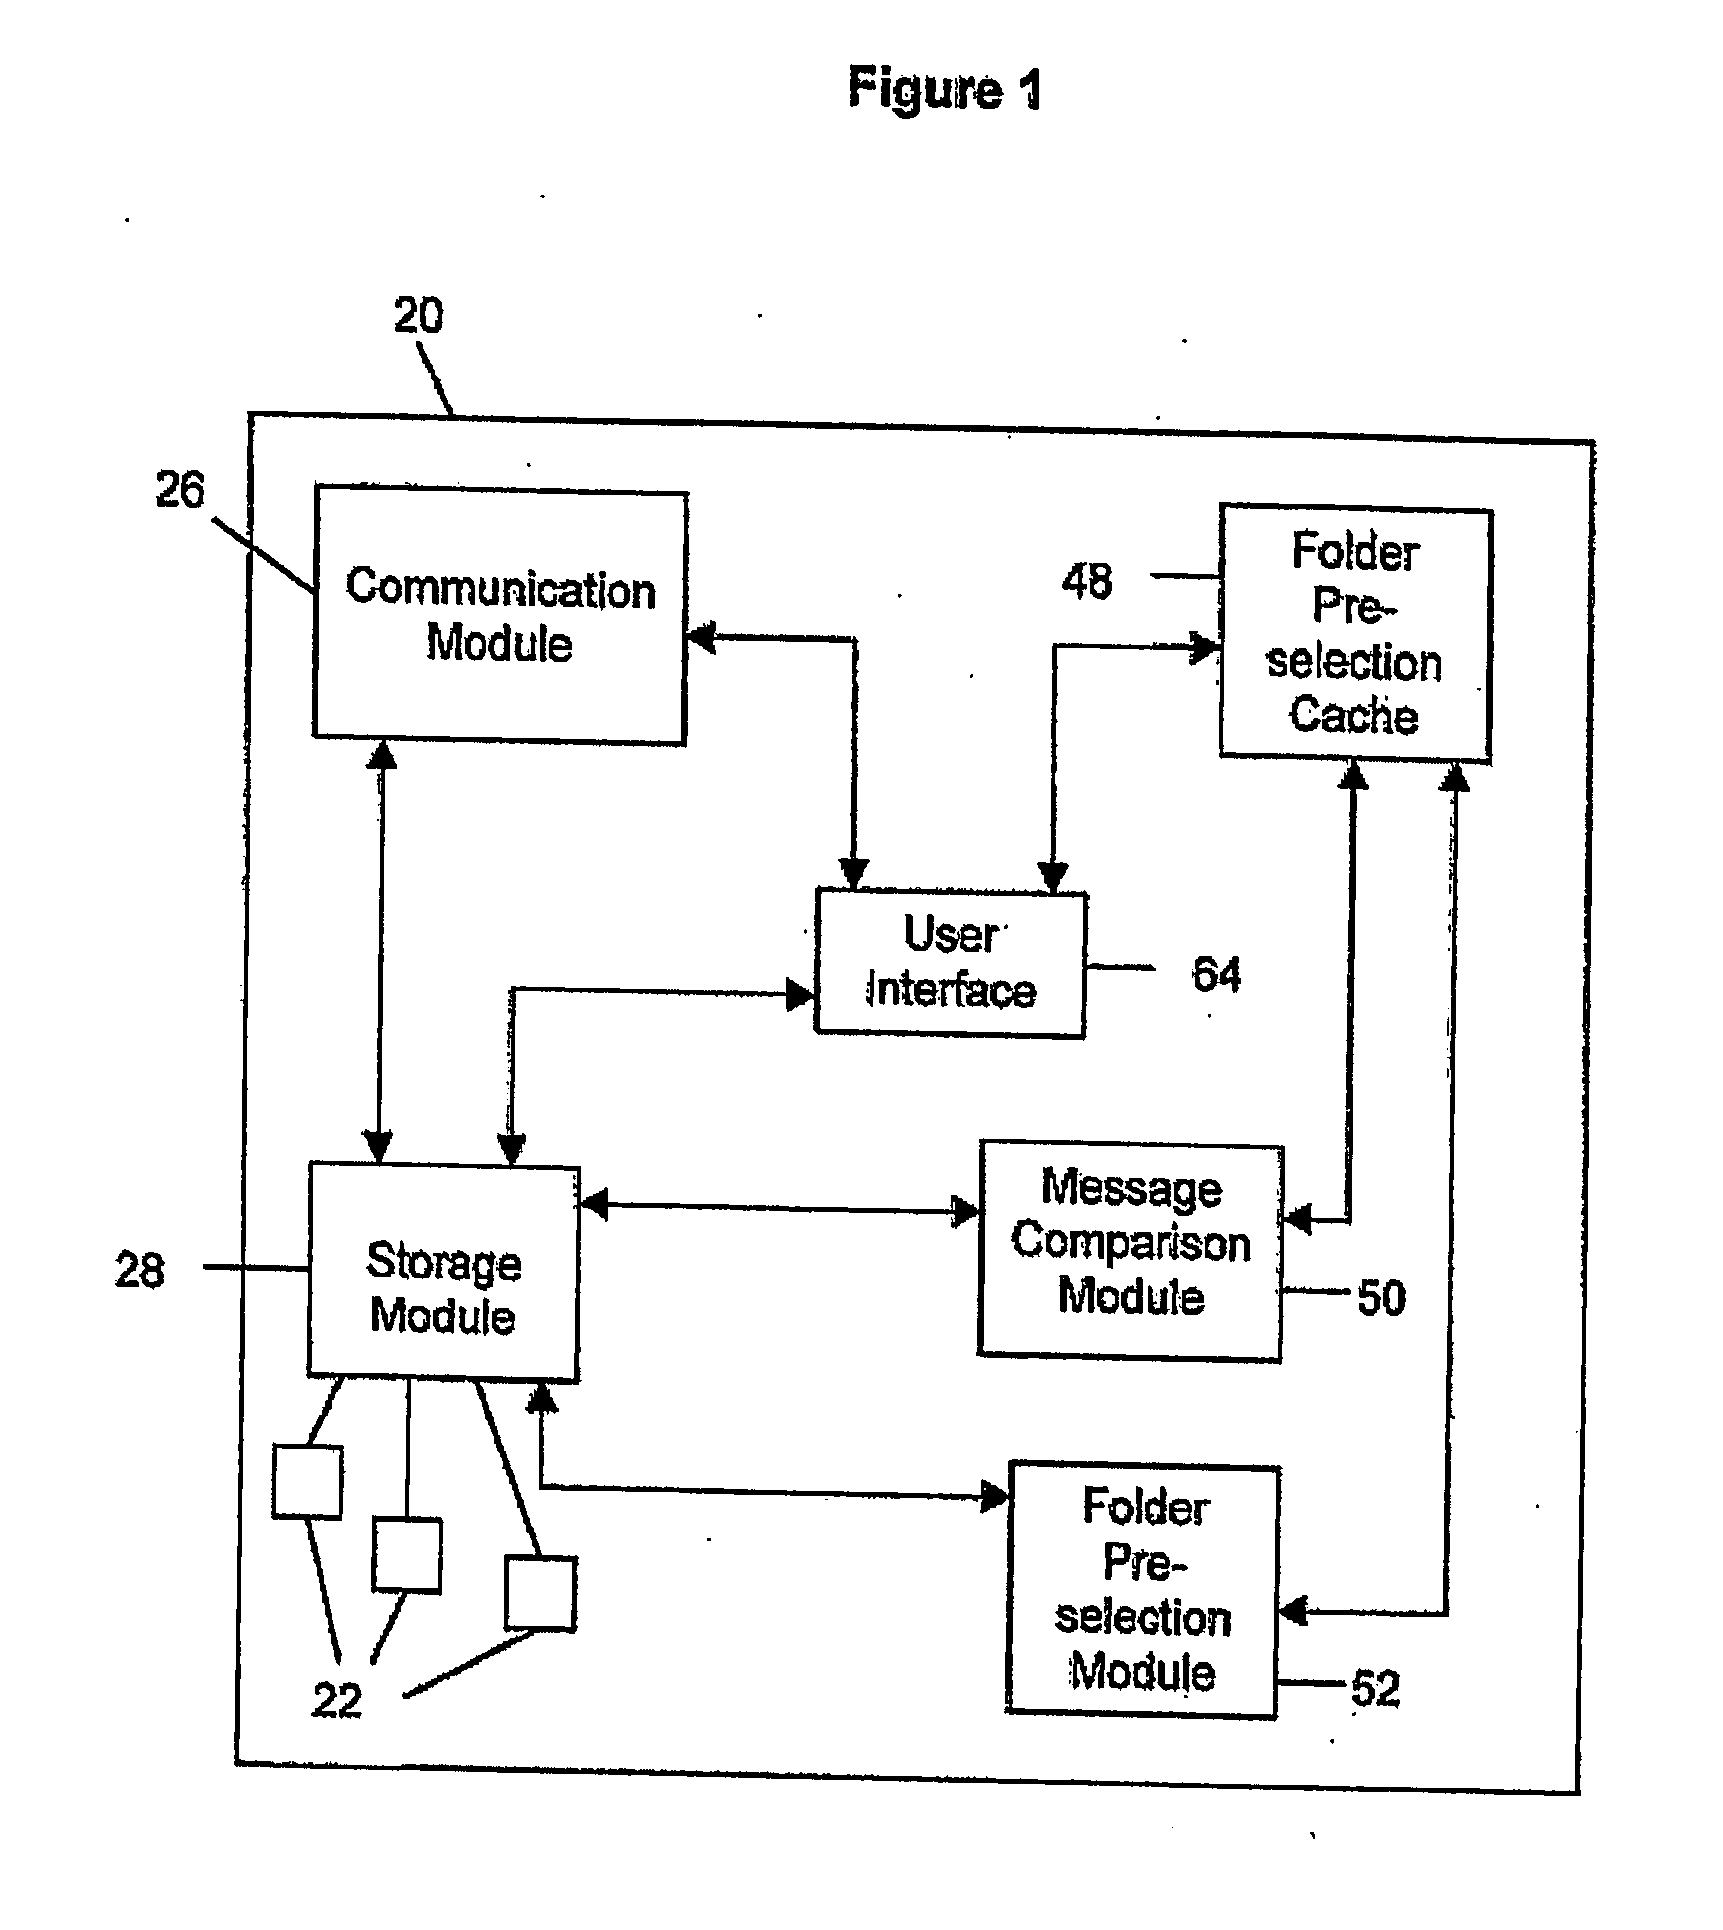 Method, system and computer software product for pre-selecting a folder for a message